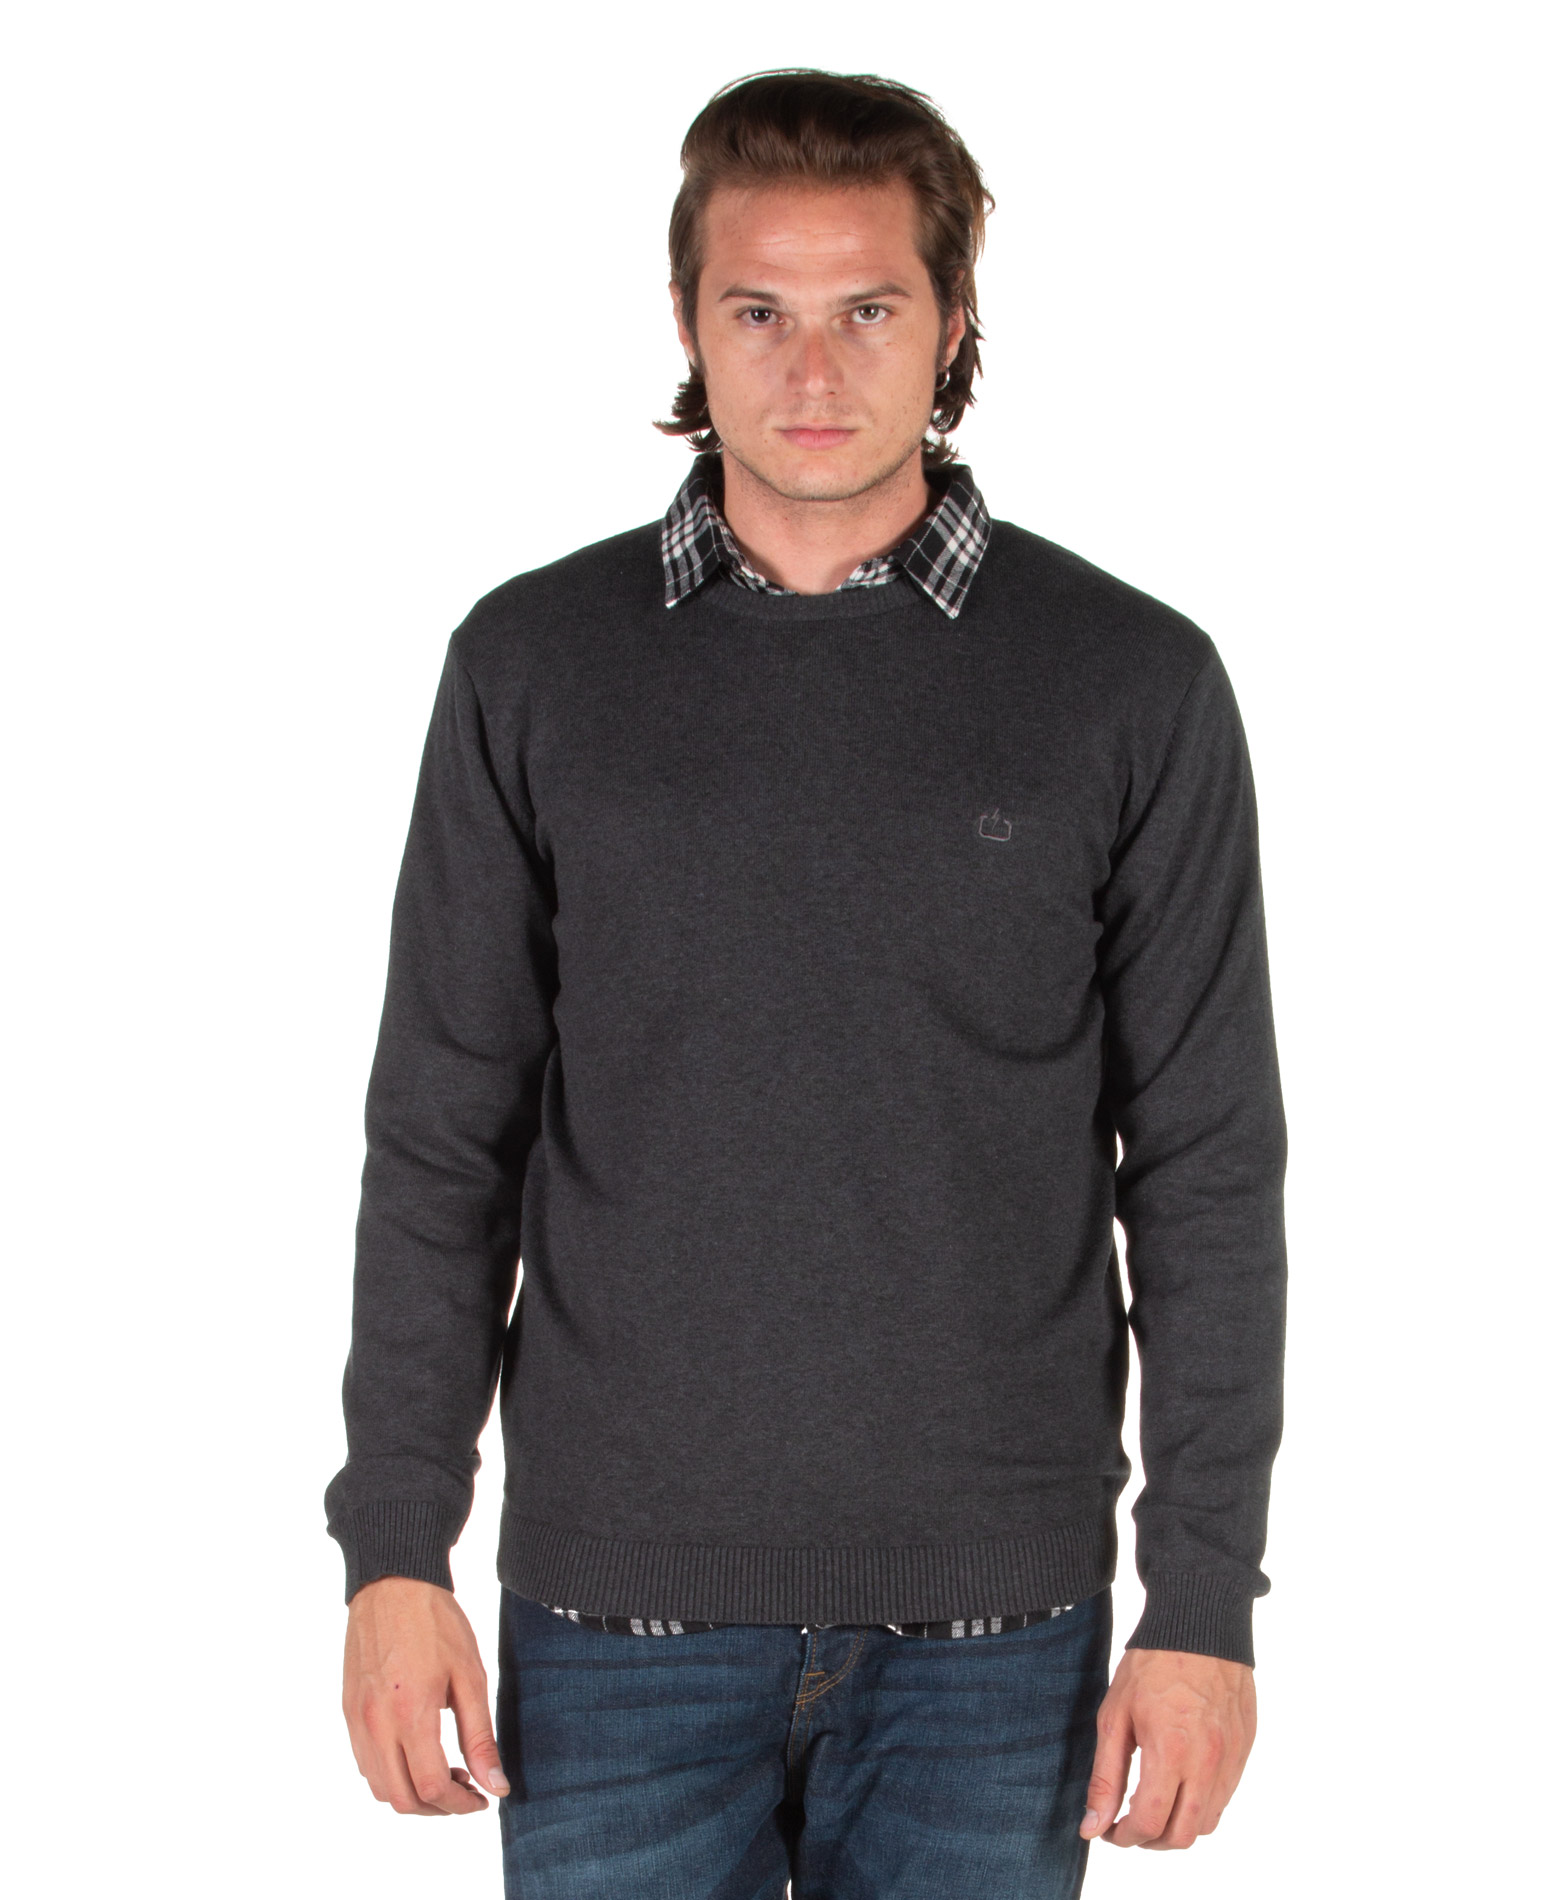 EMERSON COTTON KNITTED SWEATER 192EM7090DGREY ML Ανθρακί